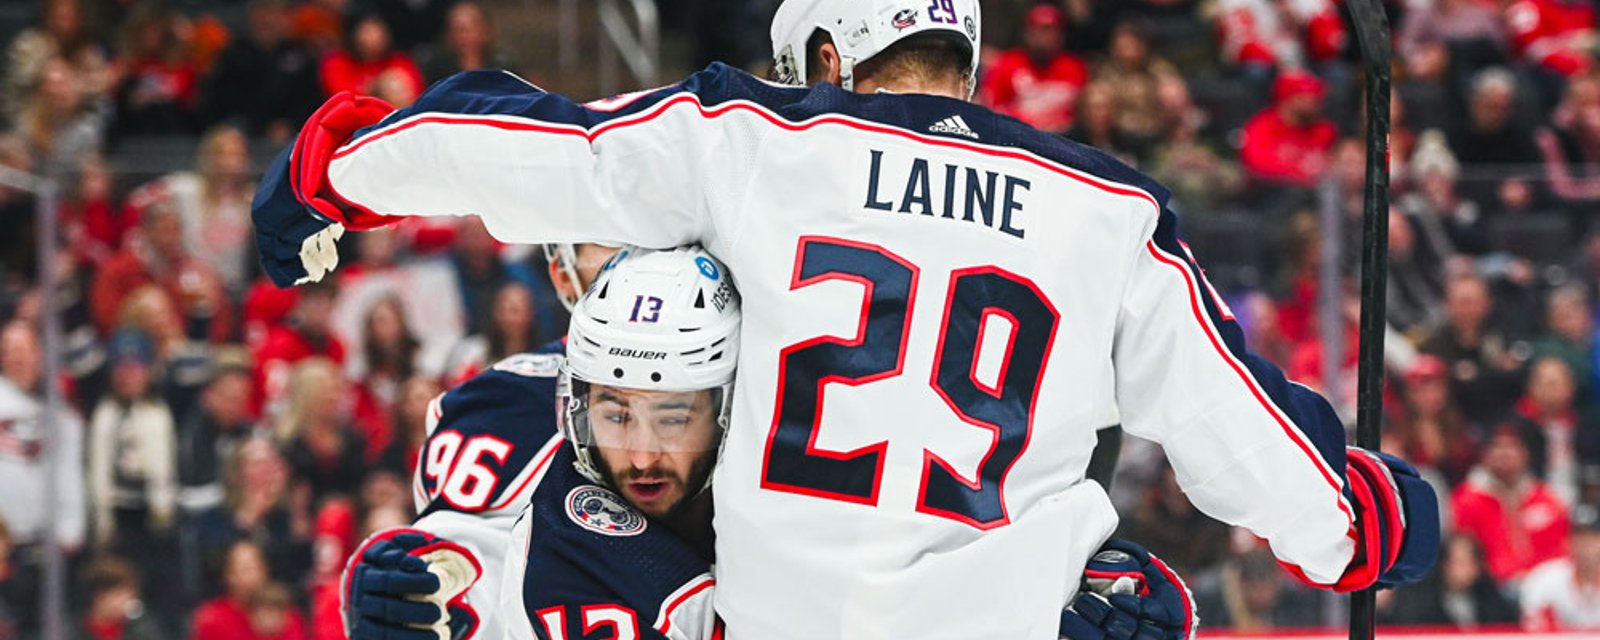 Concerning reports about Blue Jackets players following news of Laine's personal leave